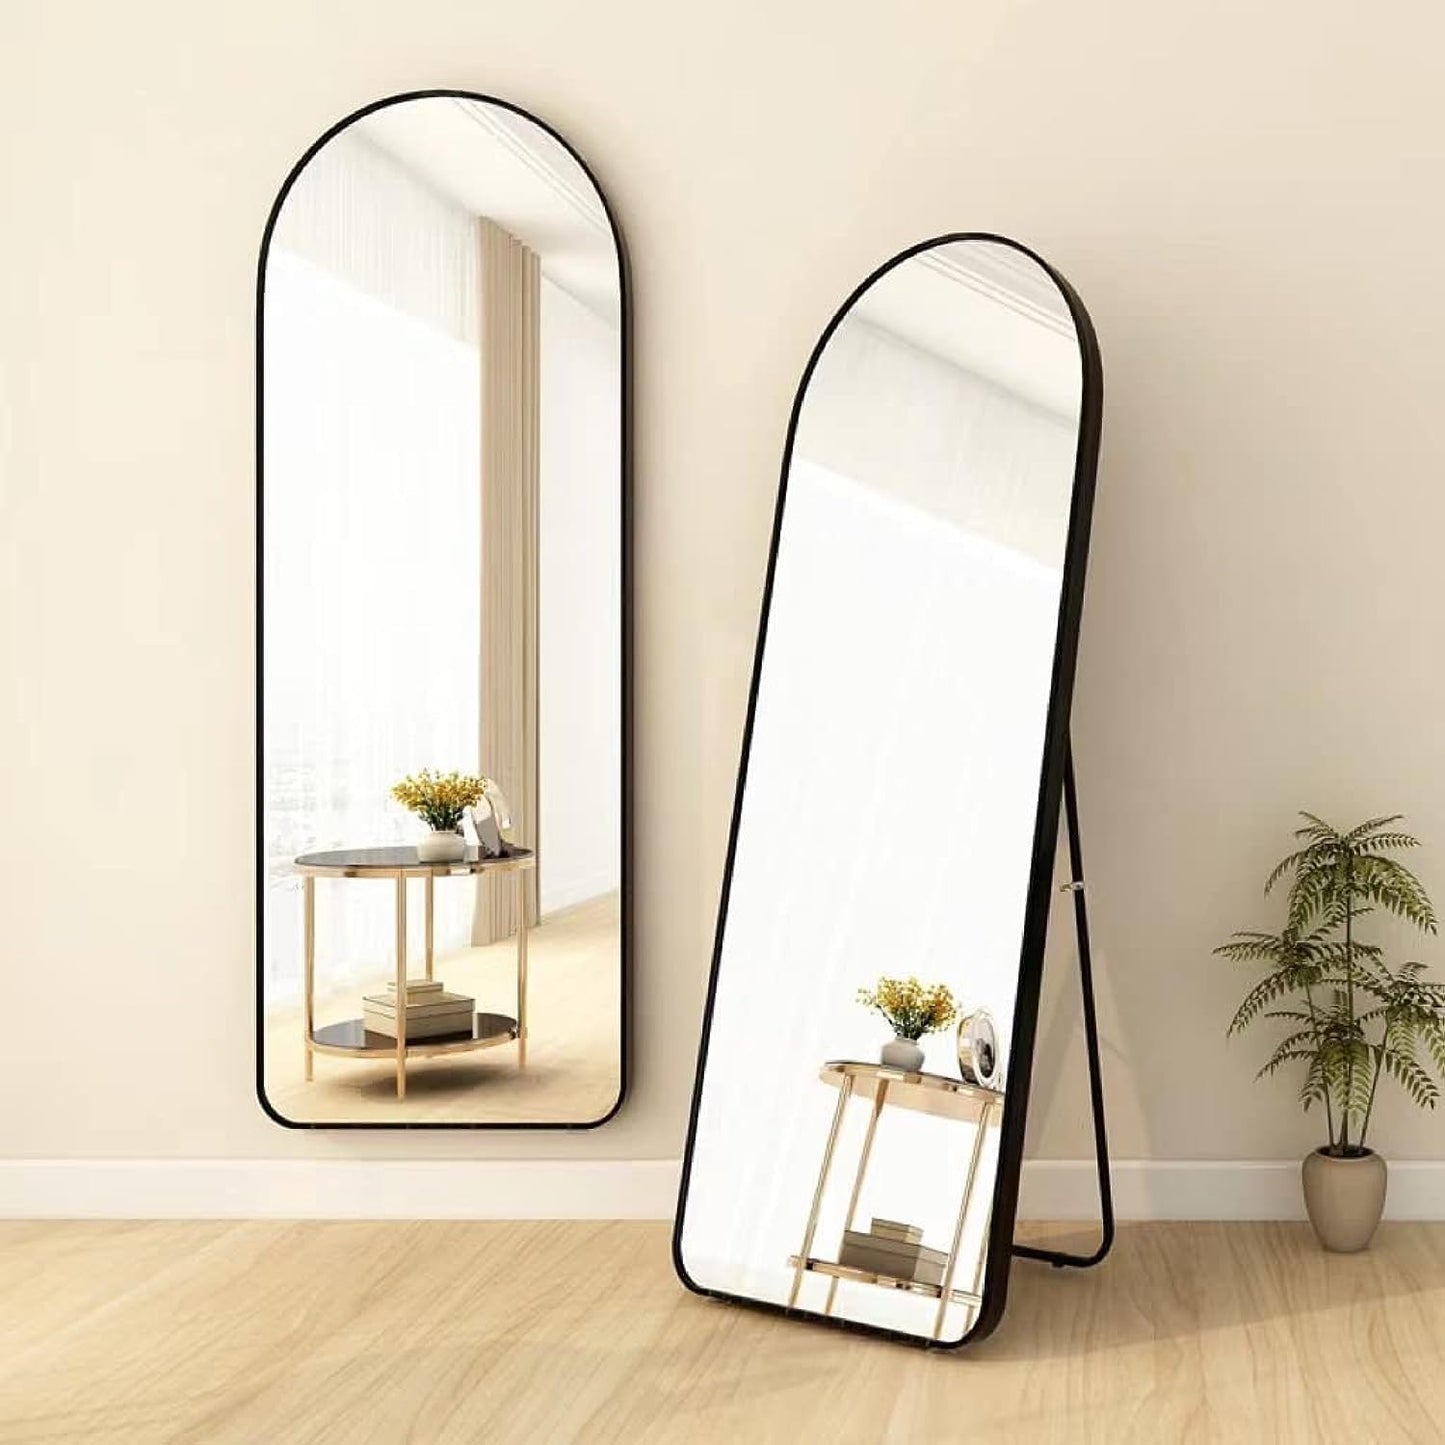 AIRFUL Mirror Full Length 152cm-42cm Arched Aluminum alloy Large Standing Dressing Mirror Hanging Leaning Against Wall Mounted Mirror with Stand for Bedroom Locker Room Living Room (Black)